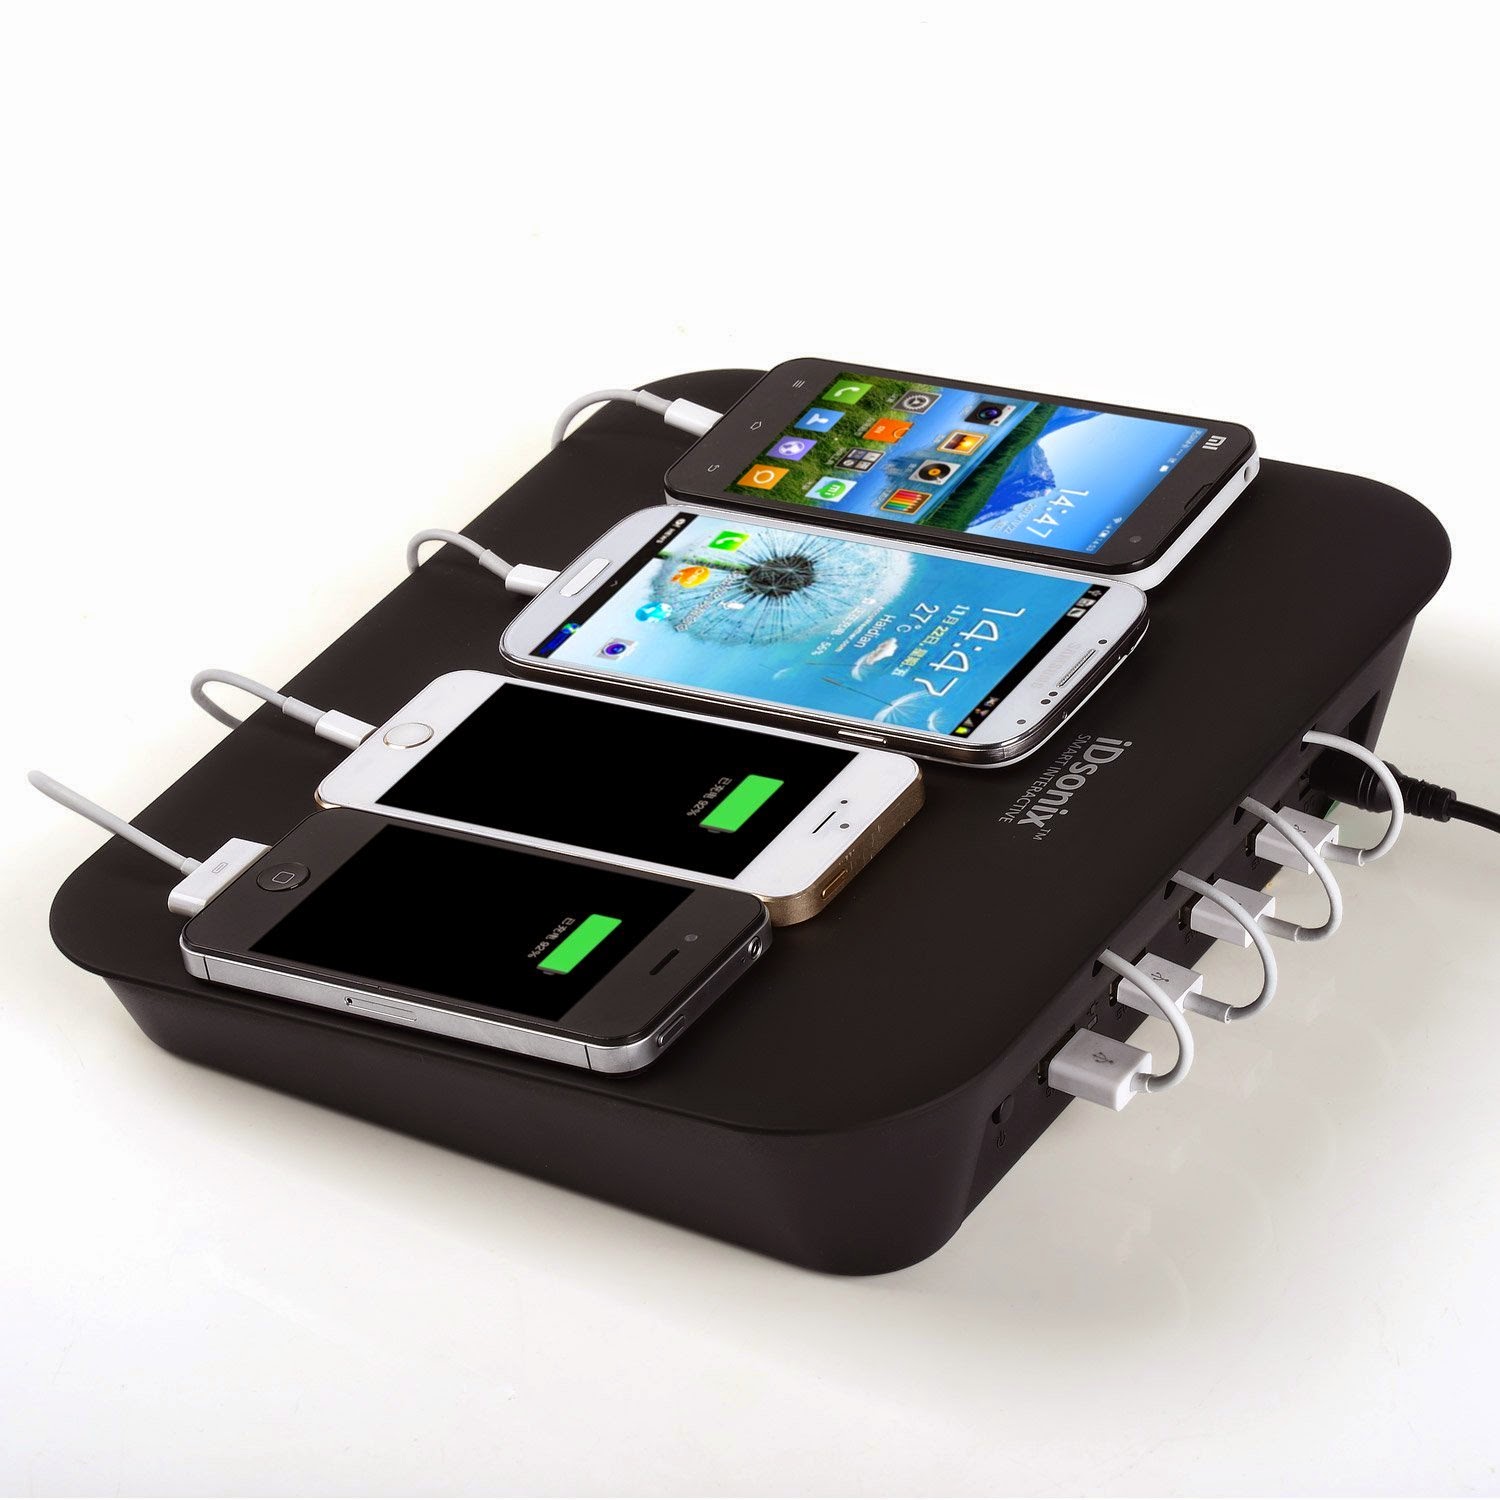 iDsonix Charging Station Easy Ways for Better Organization of Mobile